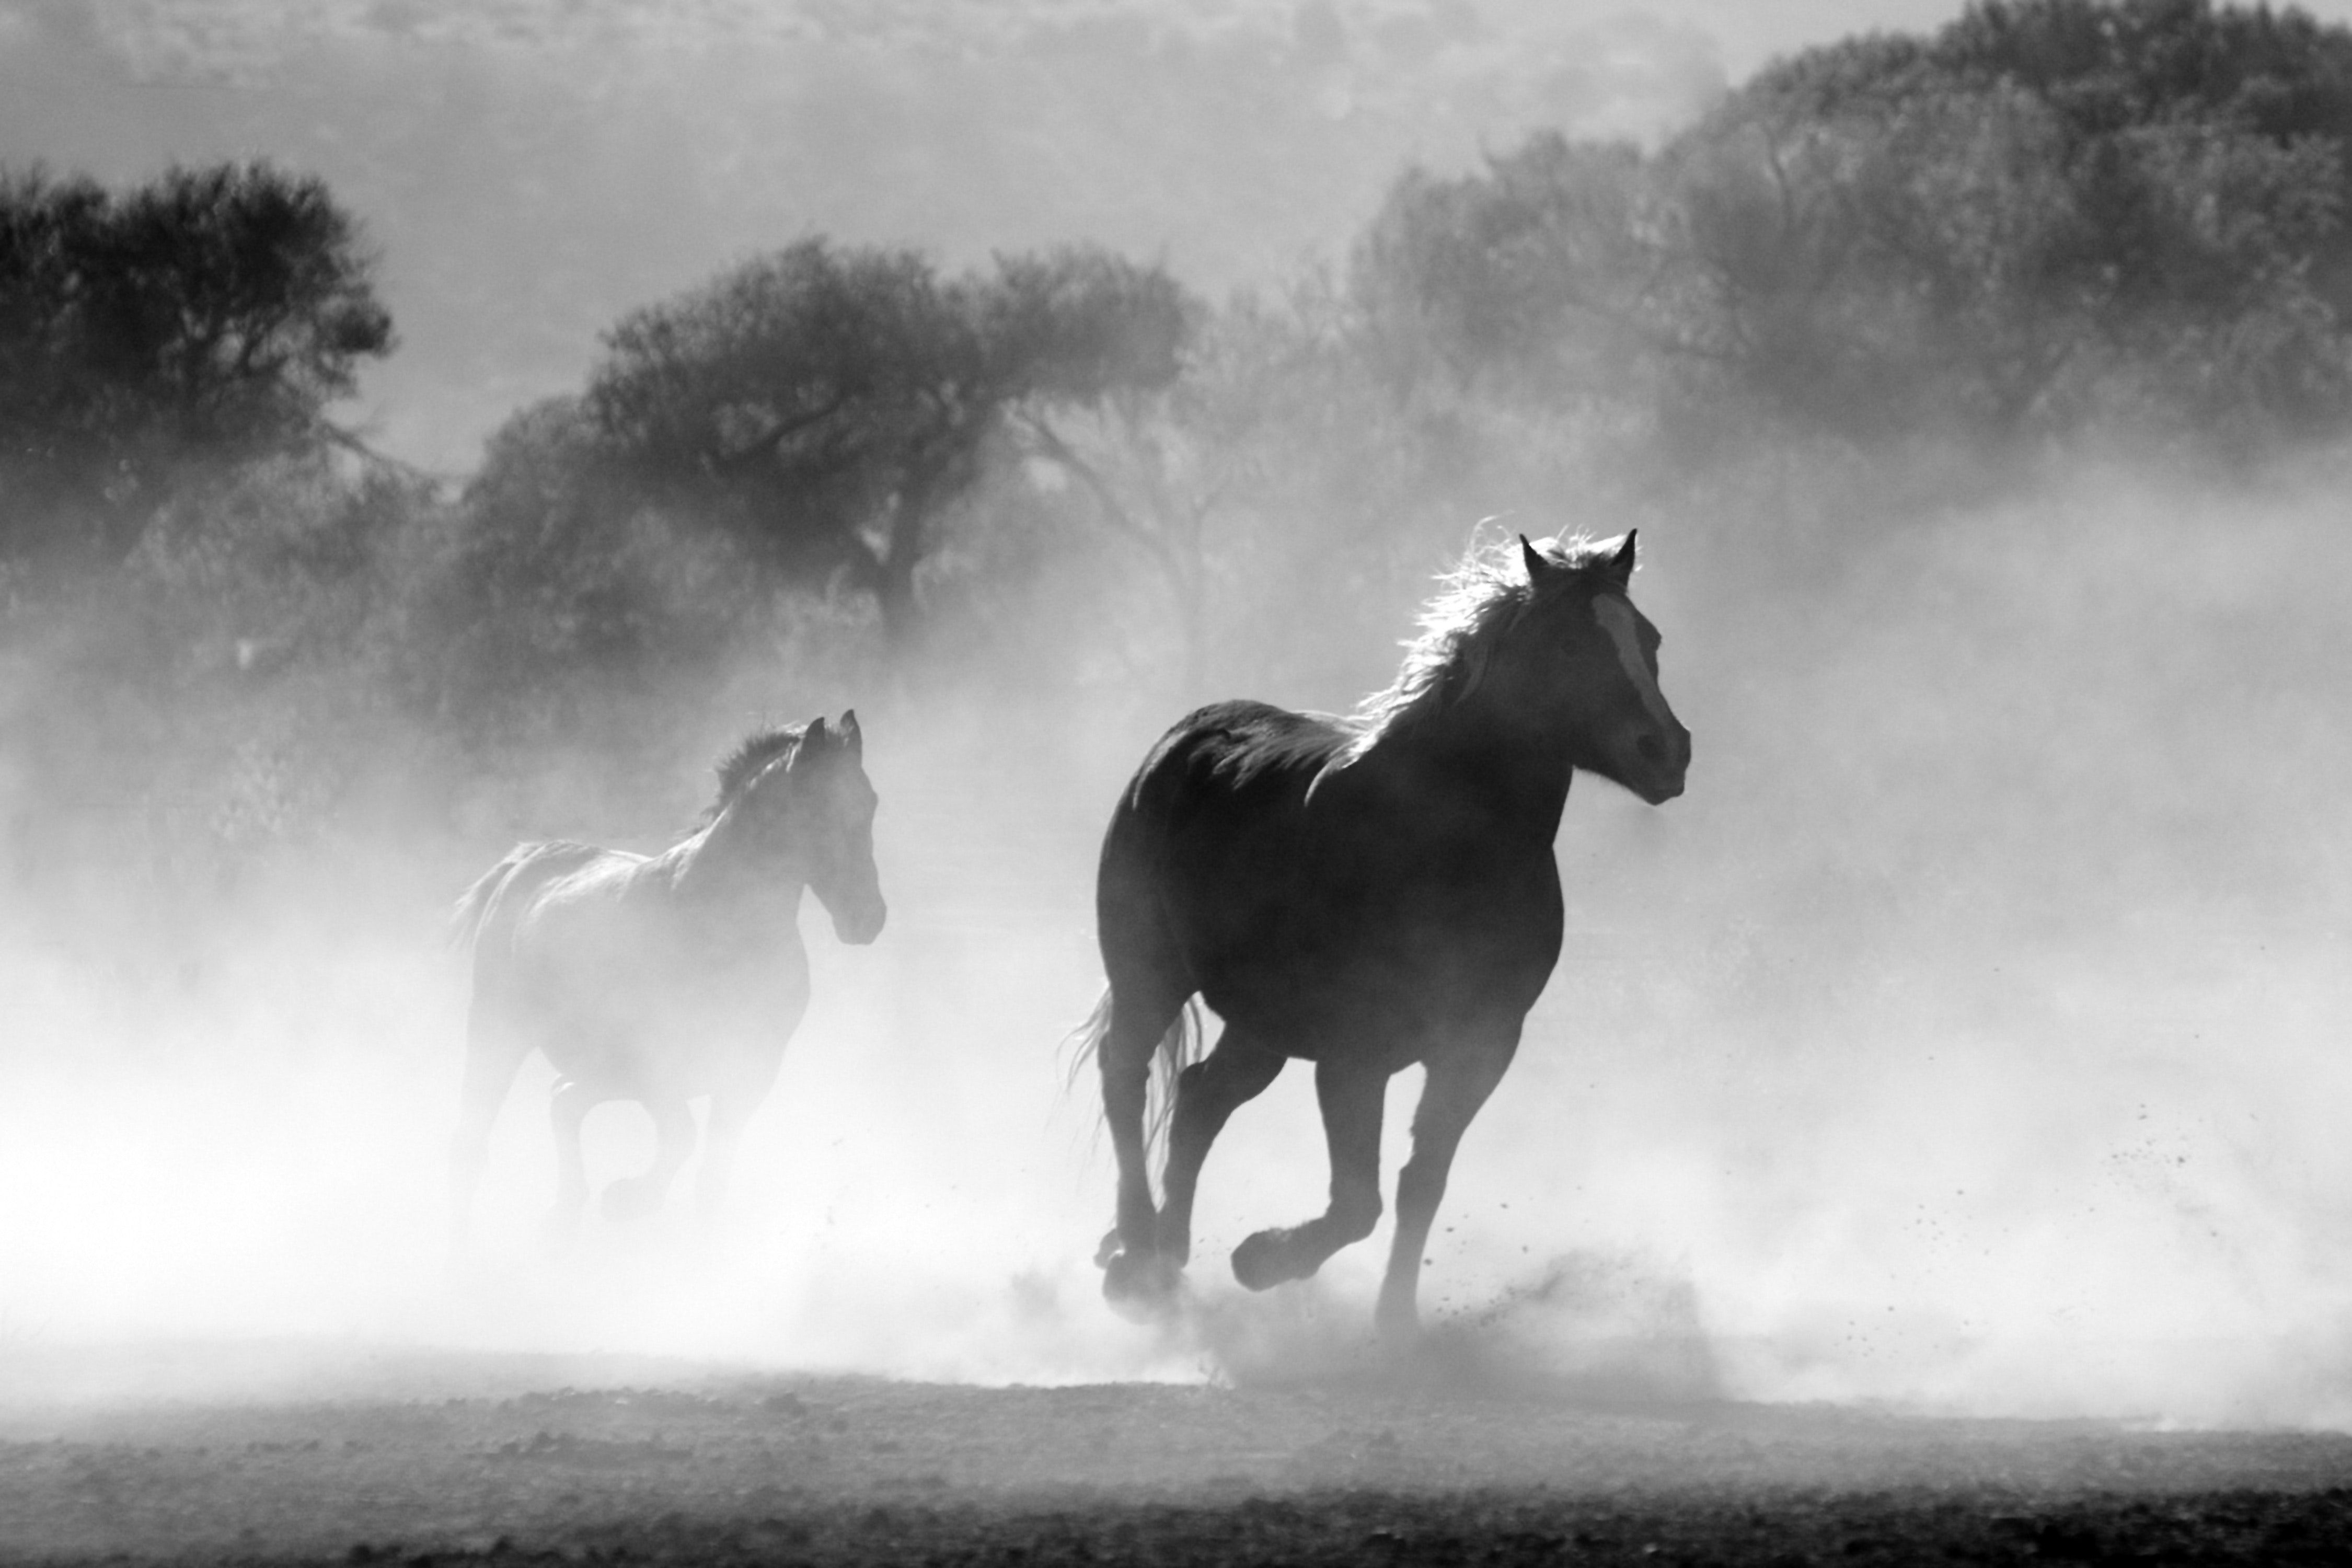 A couple of horses running through the dirt - Horse